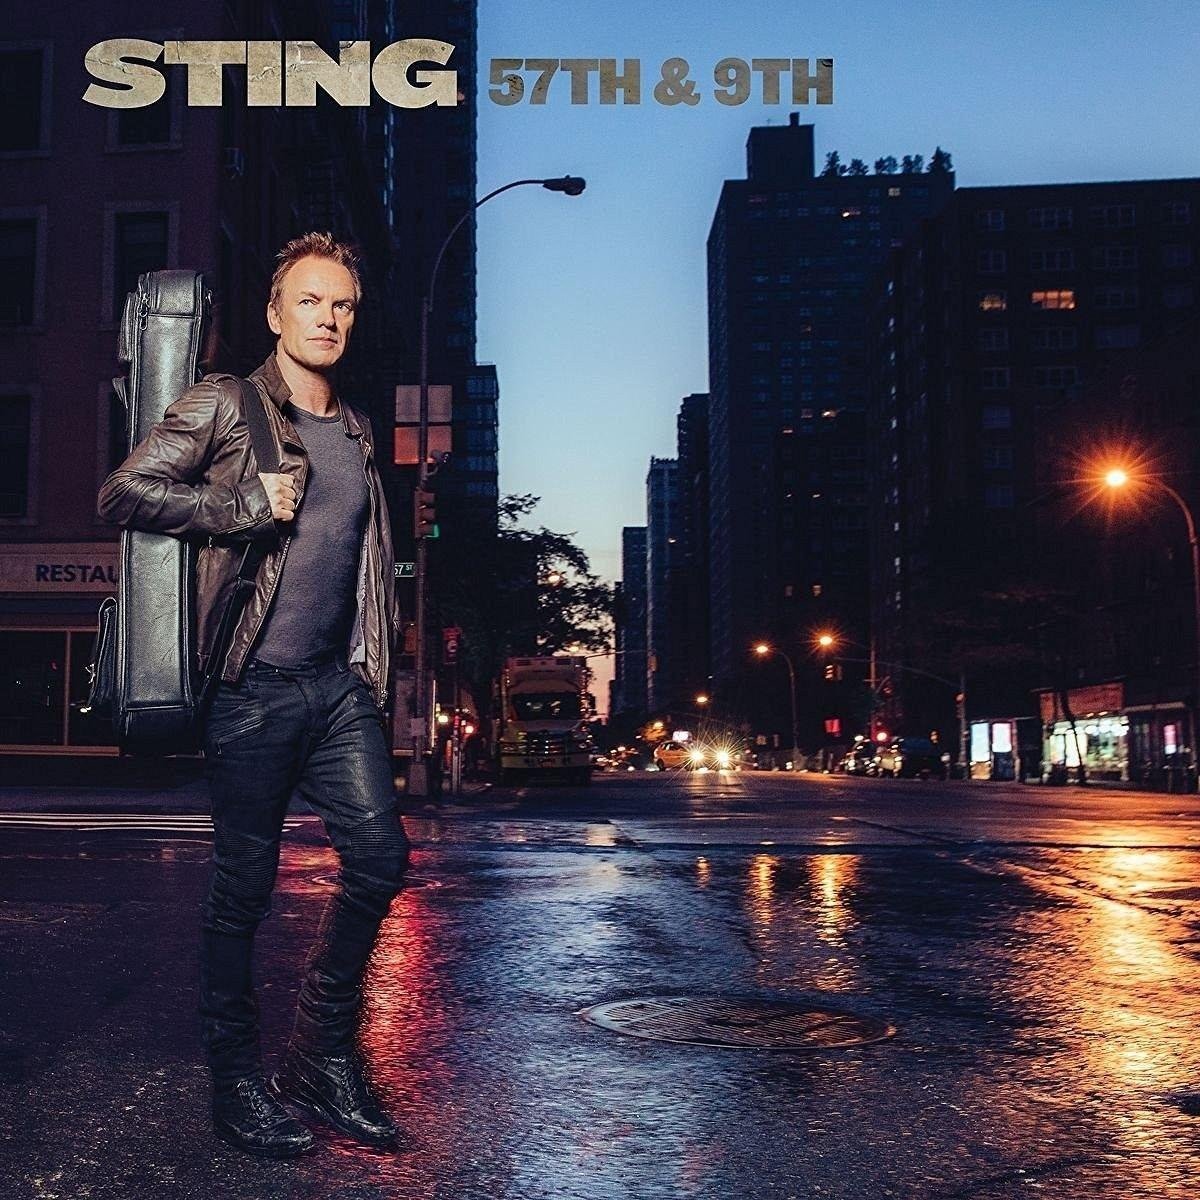 Sting’s most recent album revs up and rocks out, but it’s really a journey to nowhere new and leaves plenty of roadkill behind